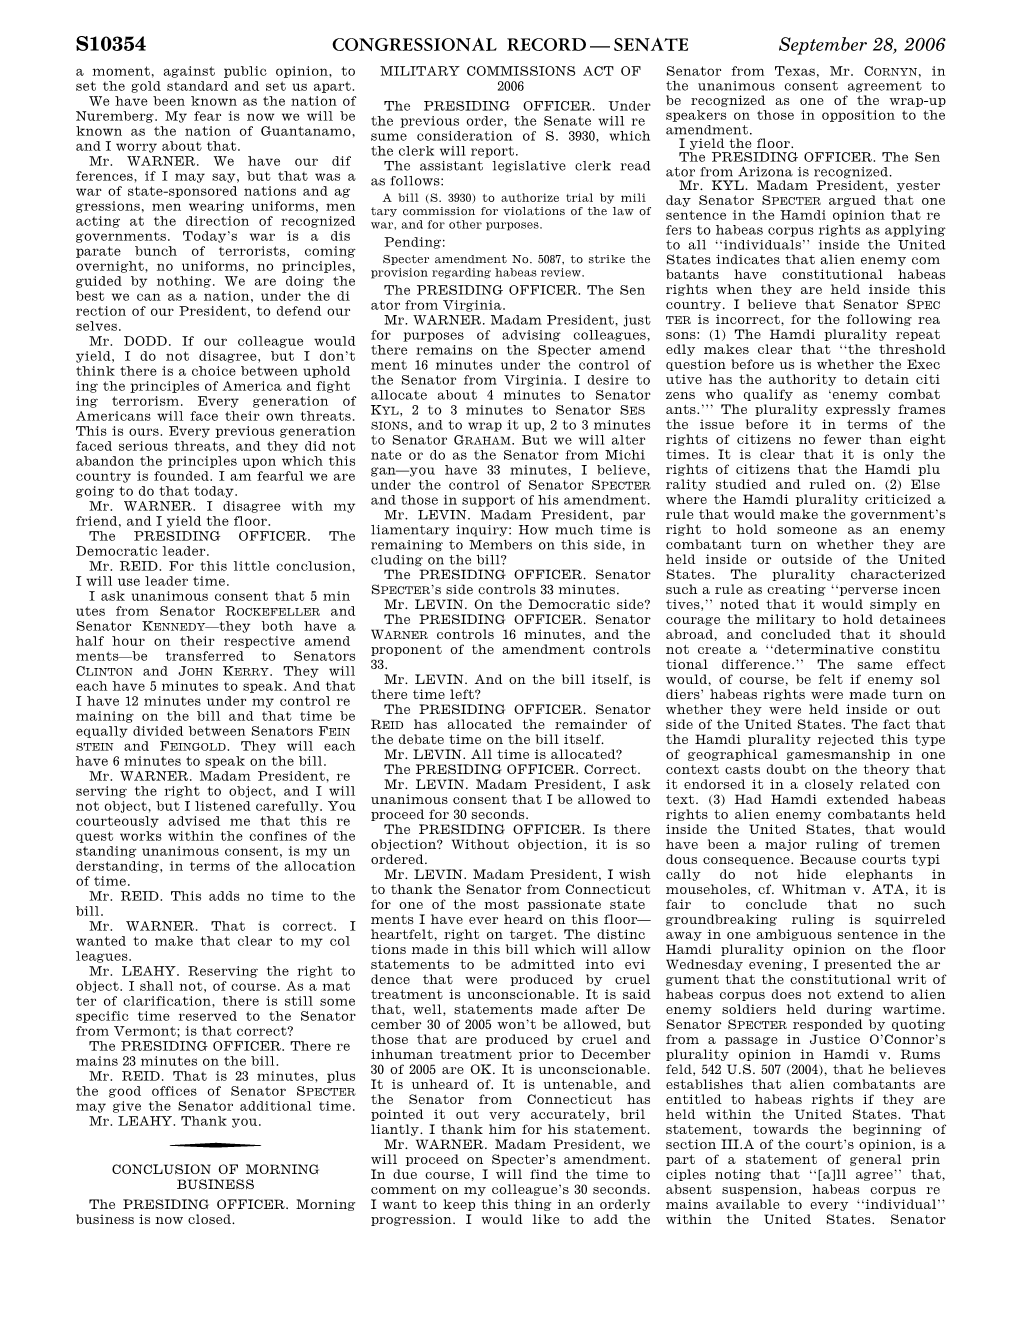 CONGRESSIONAL RECORD — SENATE September 28, 2006 a Moment, Against Public Opinion, to MILITARY COMMISSIONS ACT of Senator from Texas, Mr